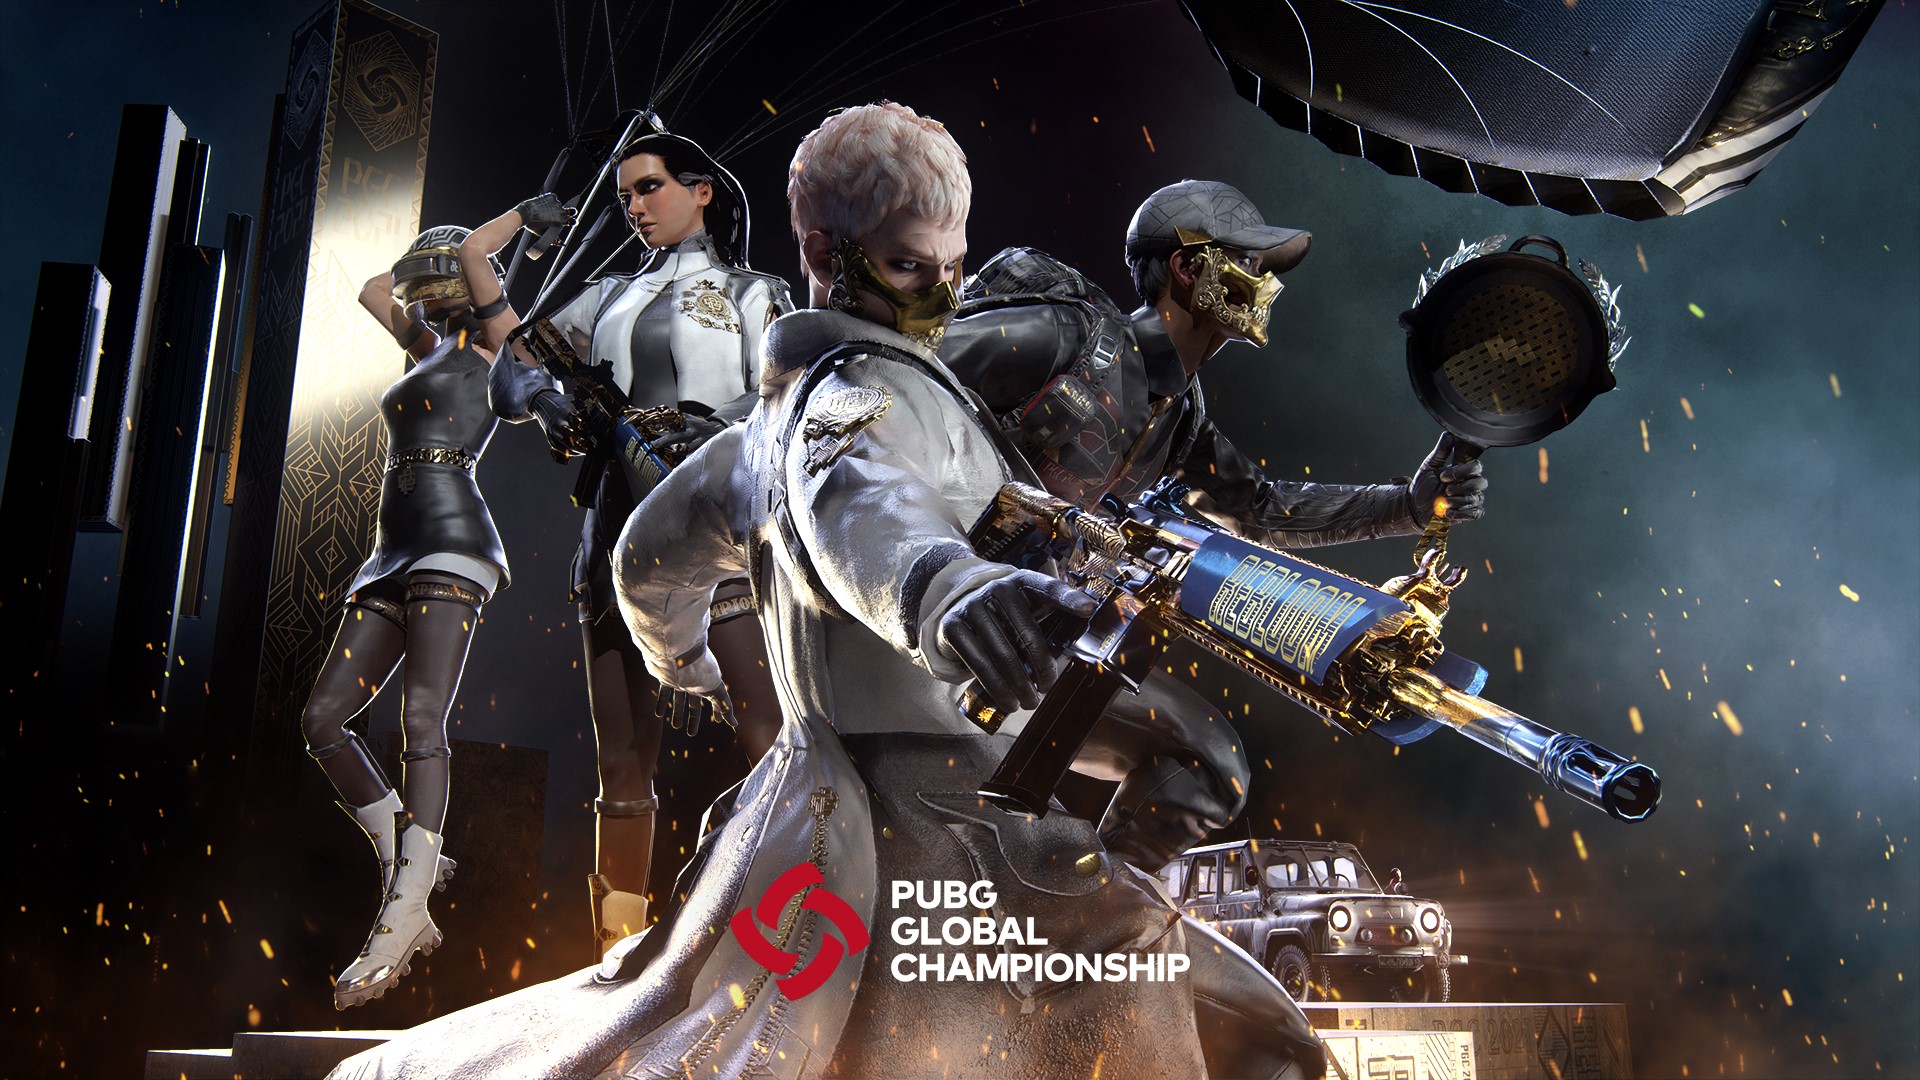 PUBG Global Championship 2021 Schedule, results, format, teams, prize pool ONE Esports